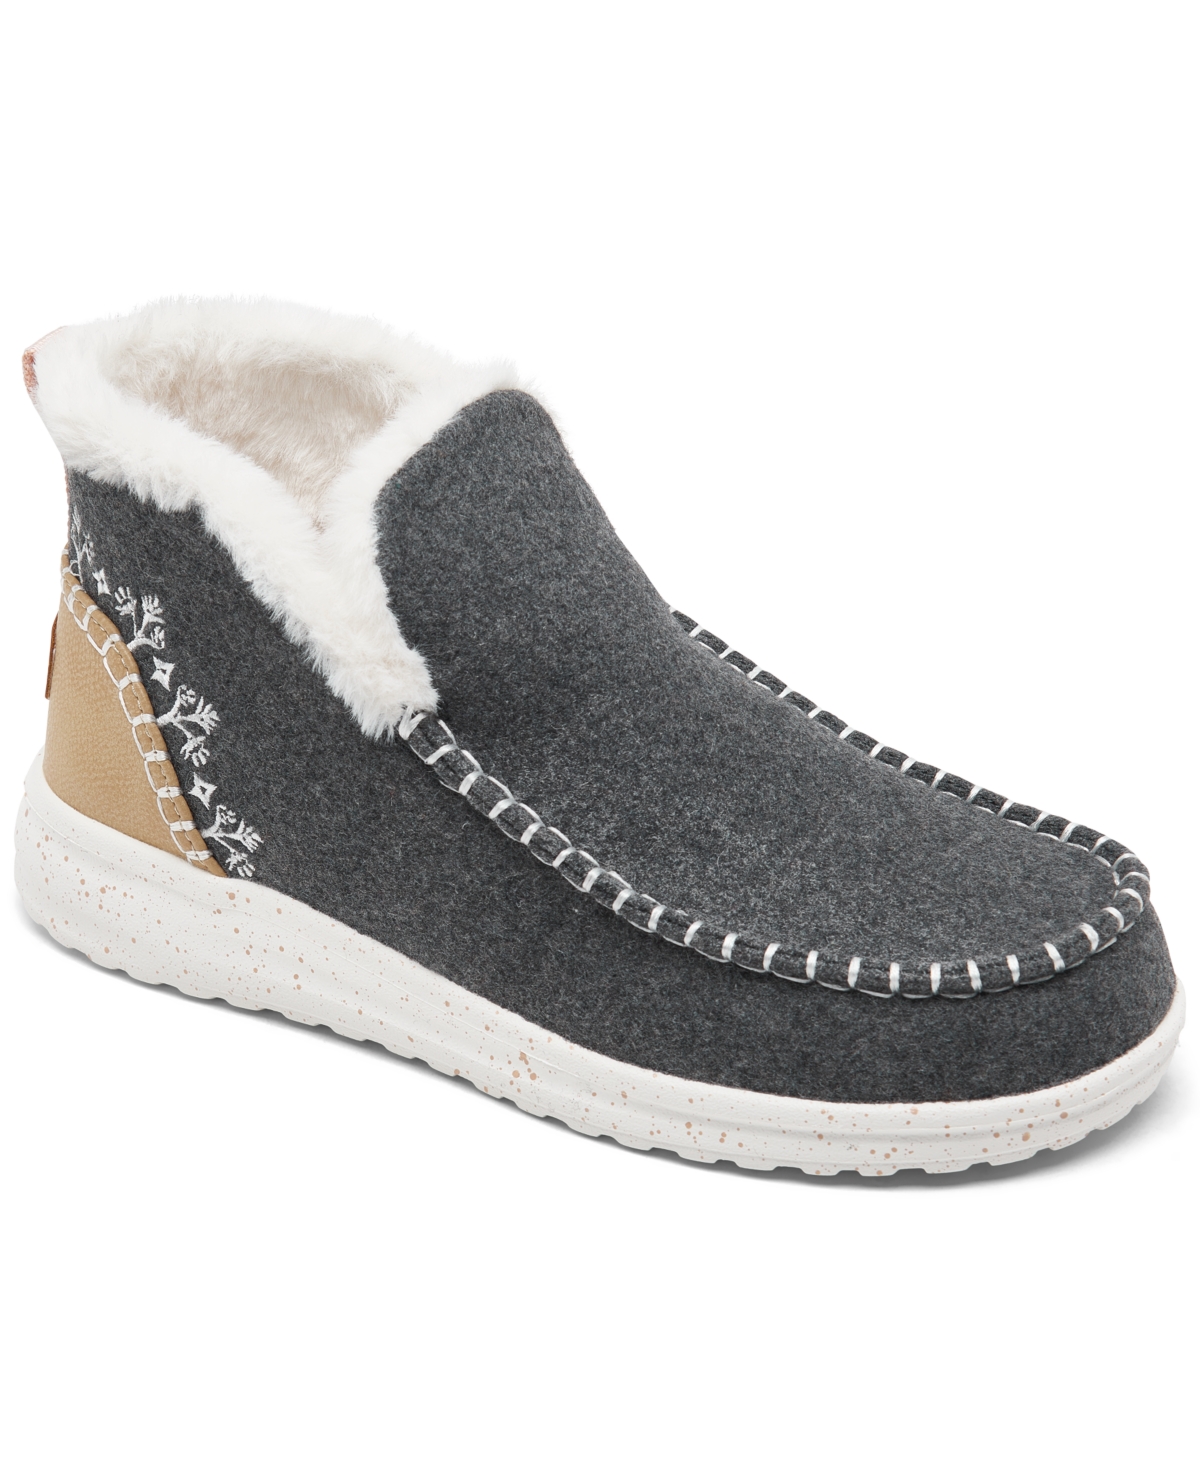 Women's Denny Wool Faux Shearling Boots from Finish Line - Gray